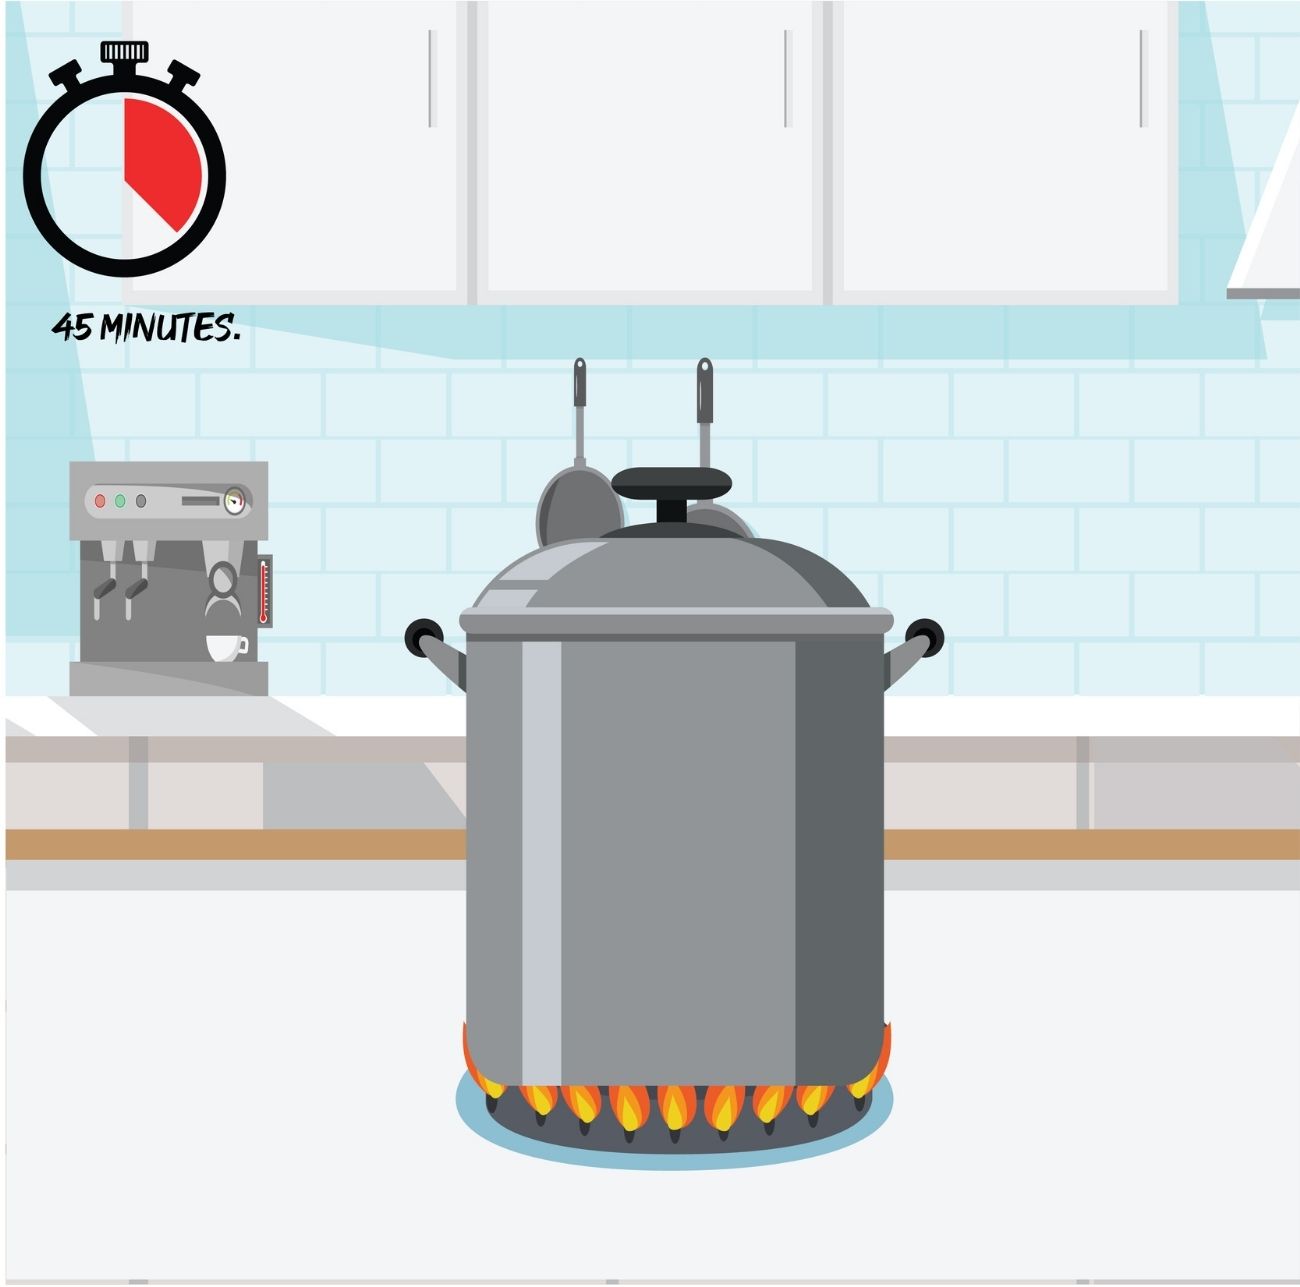 Lock the lid on your pressure cooker and set your pressure cooker to cook in medium pressure